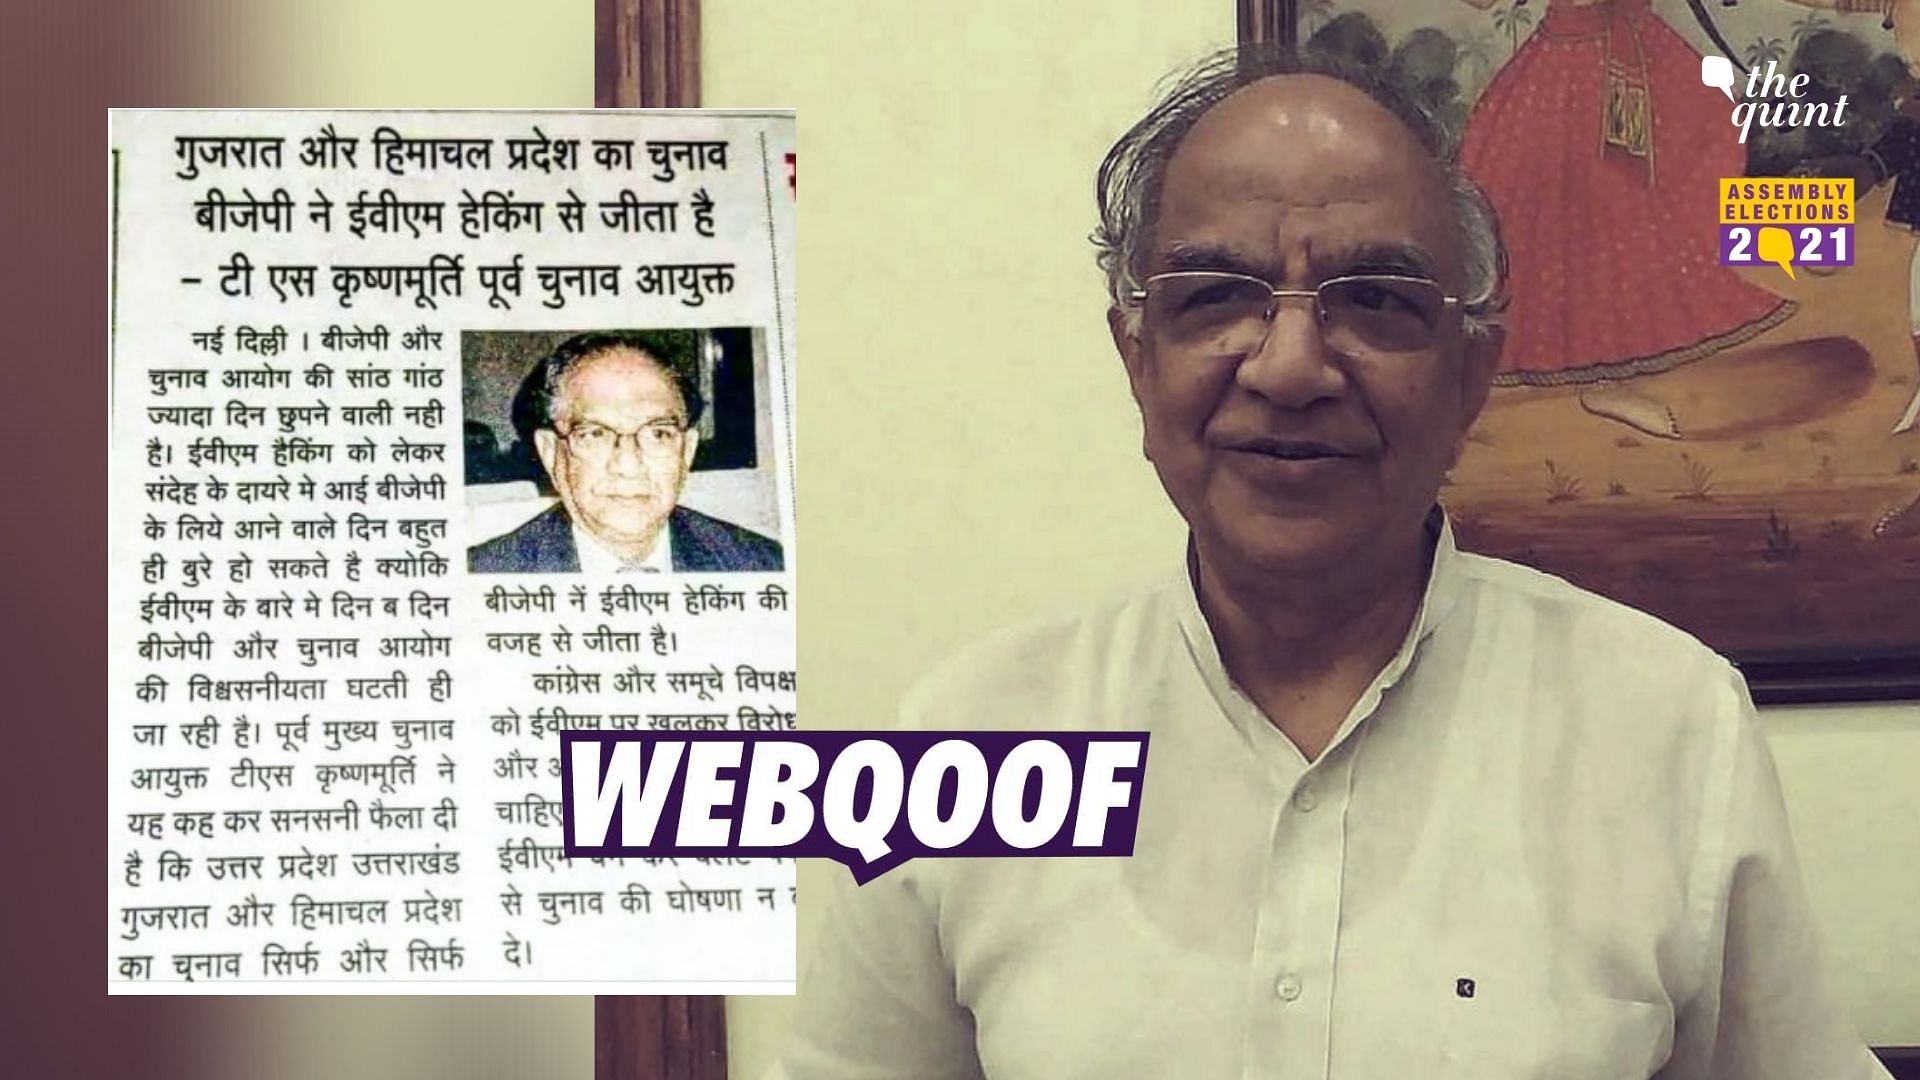 A newspaper clipping claiming the former CEC TS Krishnamurthy has accused the BJP of hacking EVMs is doing the rounds on social media.